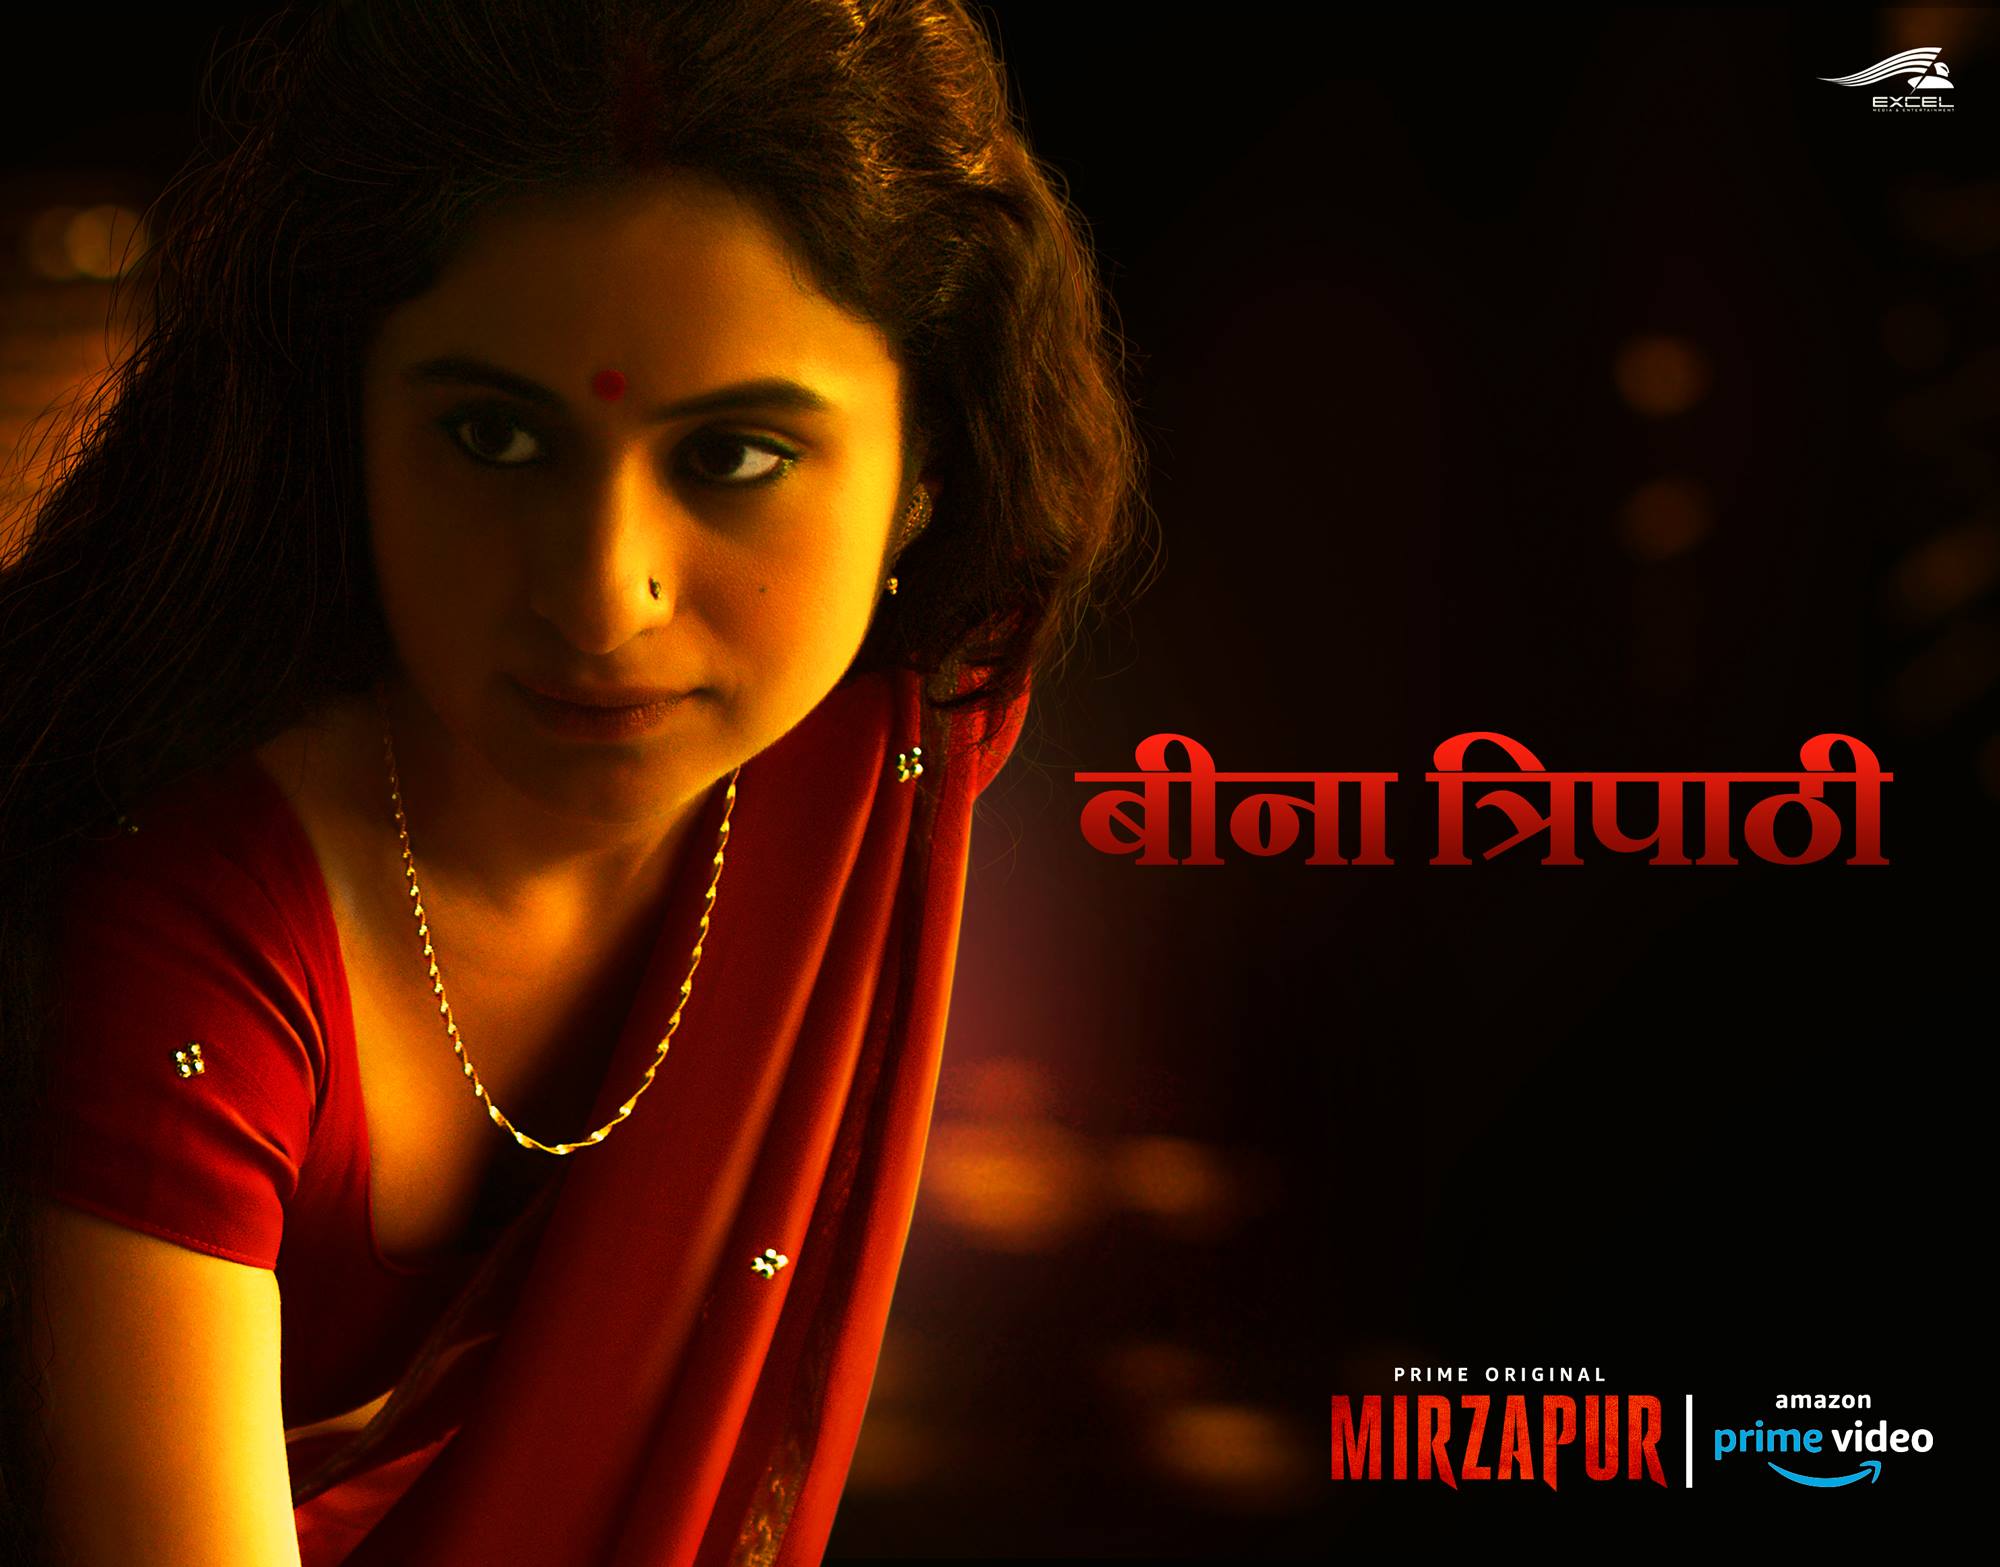 Will Mirzapur Season 3 reveal identity of Beena’s baby’s father?